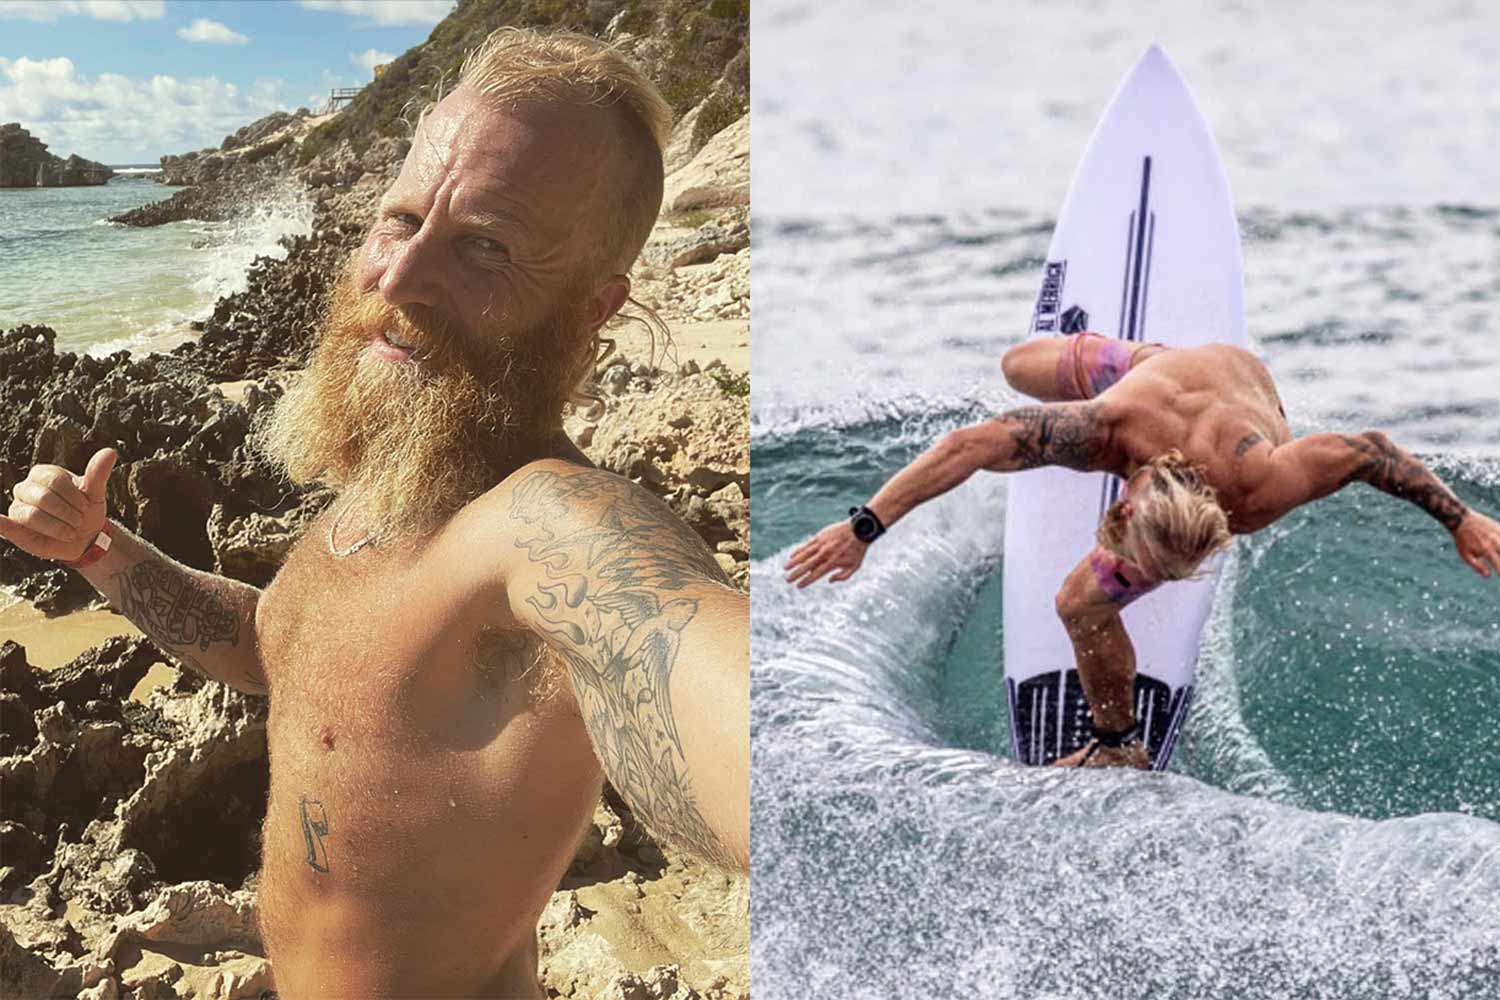 Local Aussie Legend To Set World Surfing Record For A Good Cause